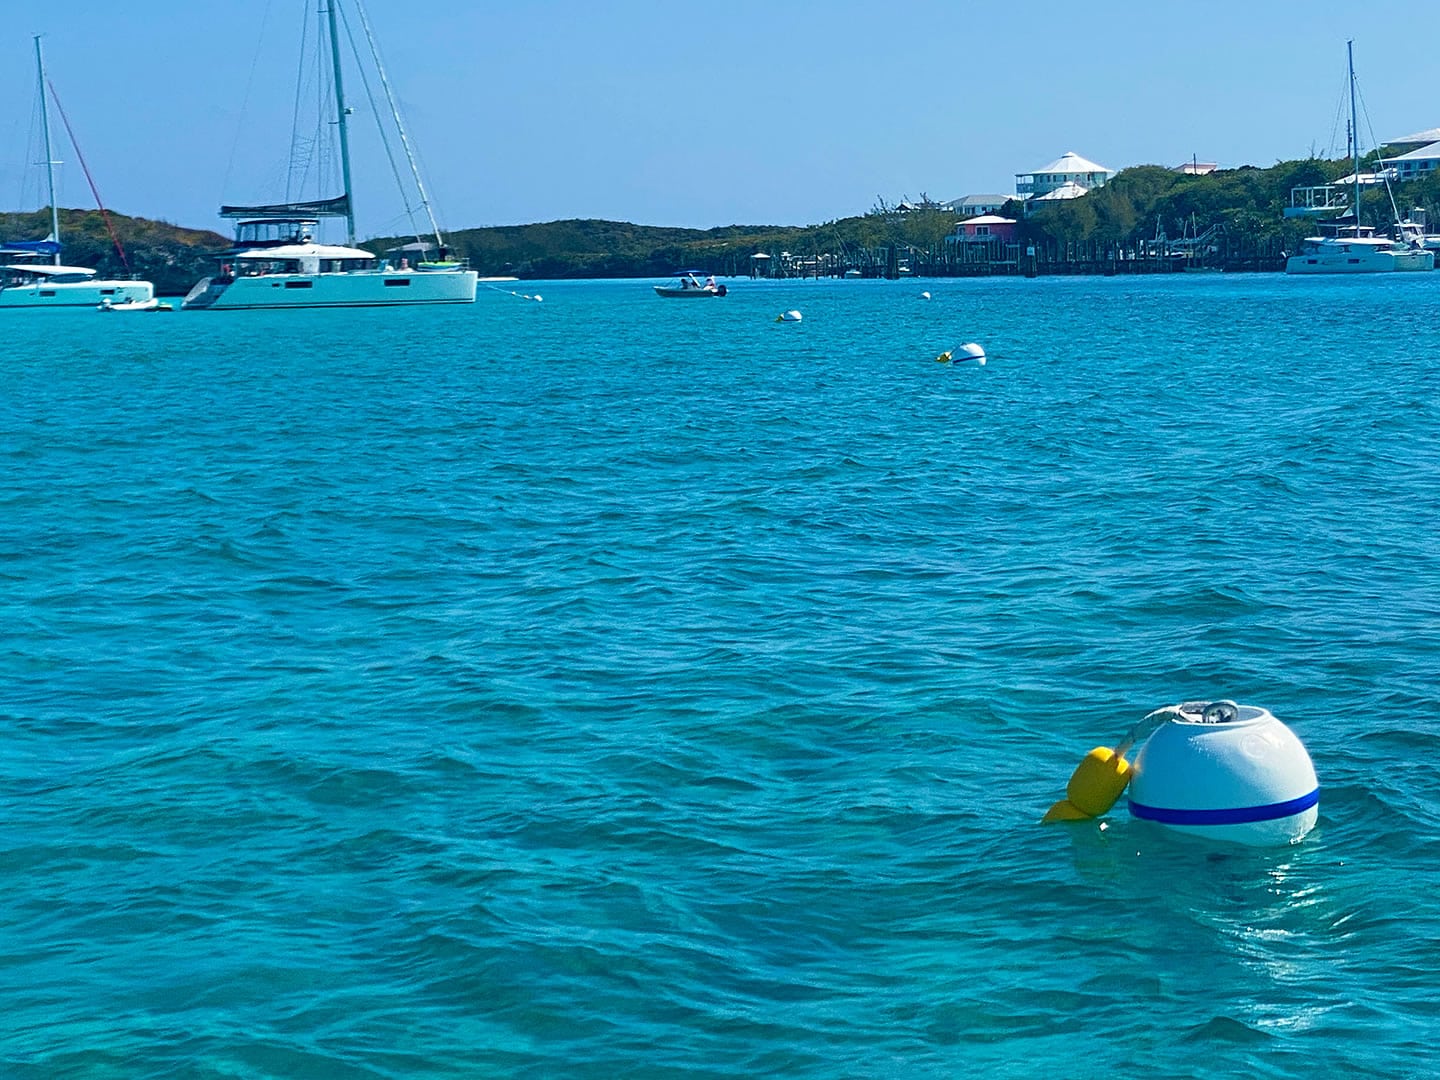 A boat is floating near a buoy in the turquoise waters of Staniel Cay.